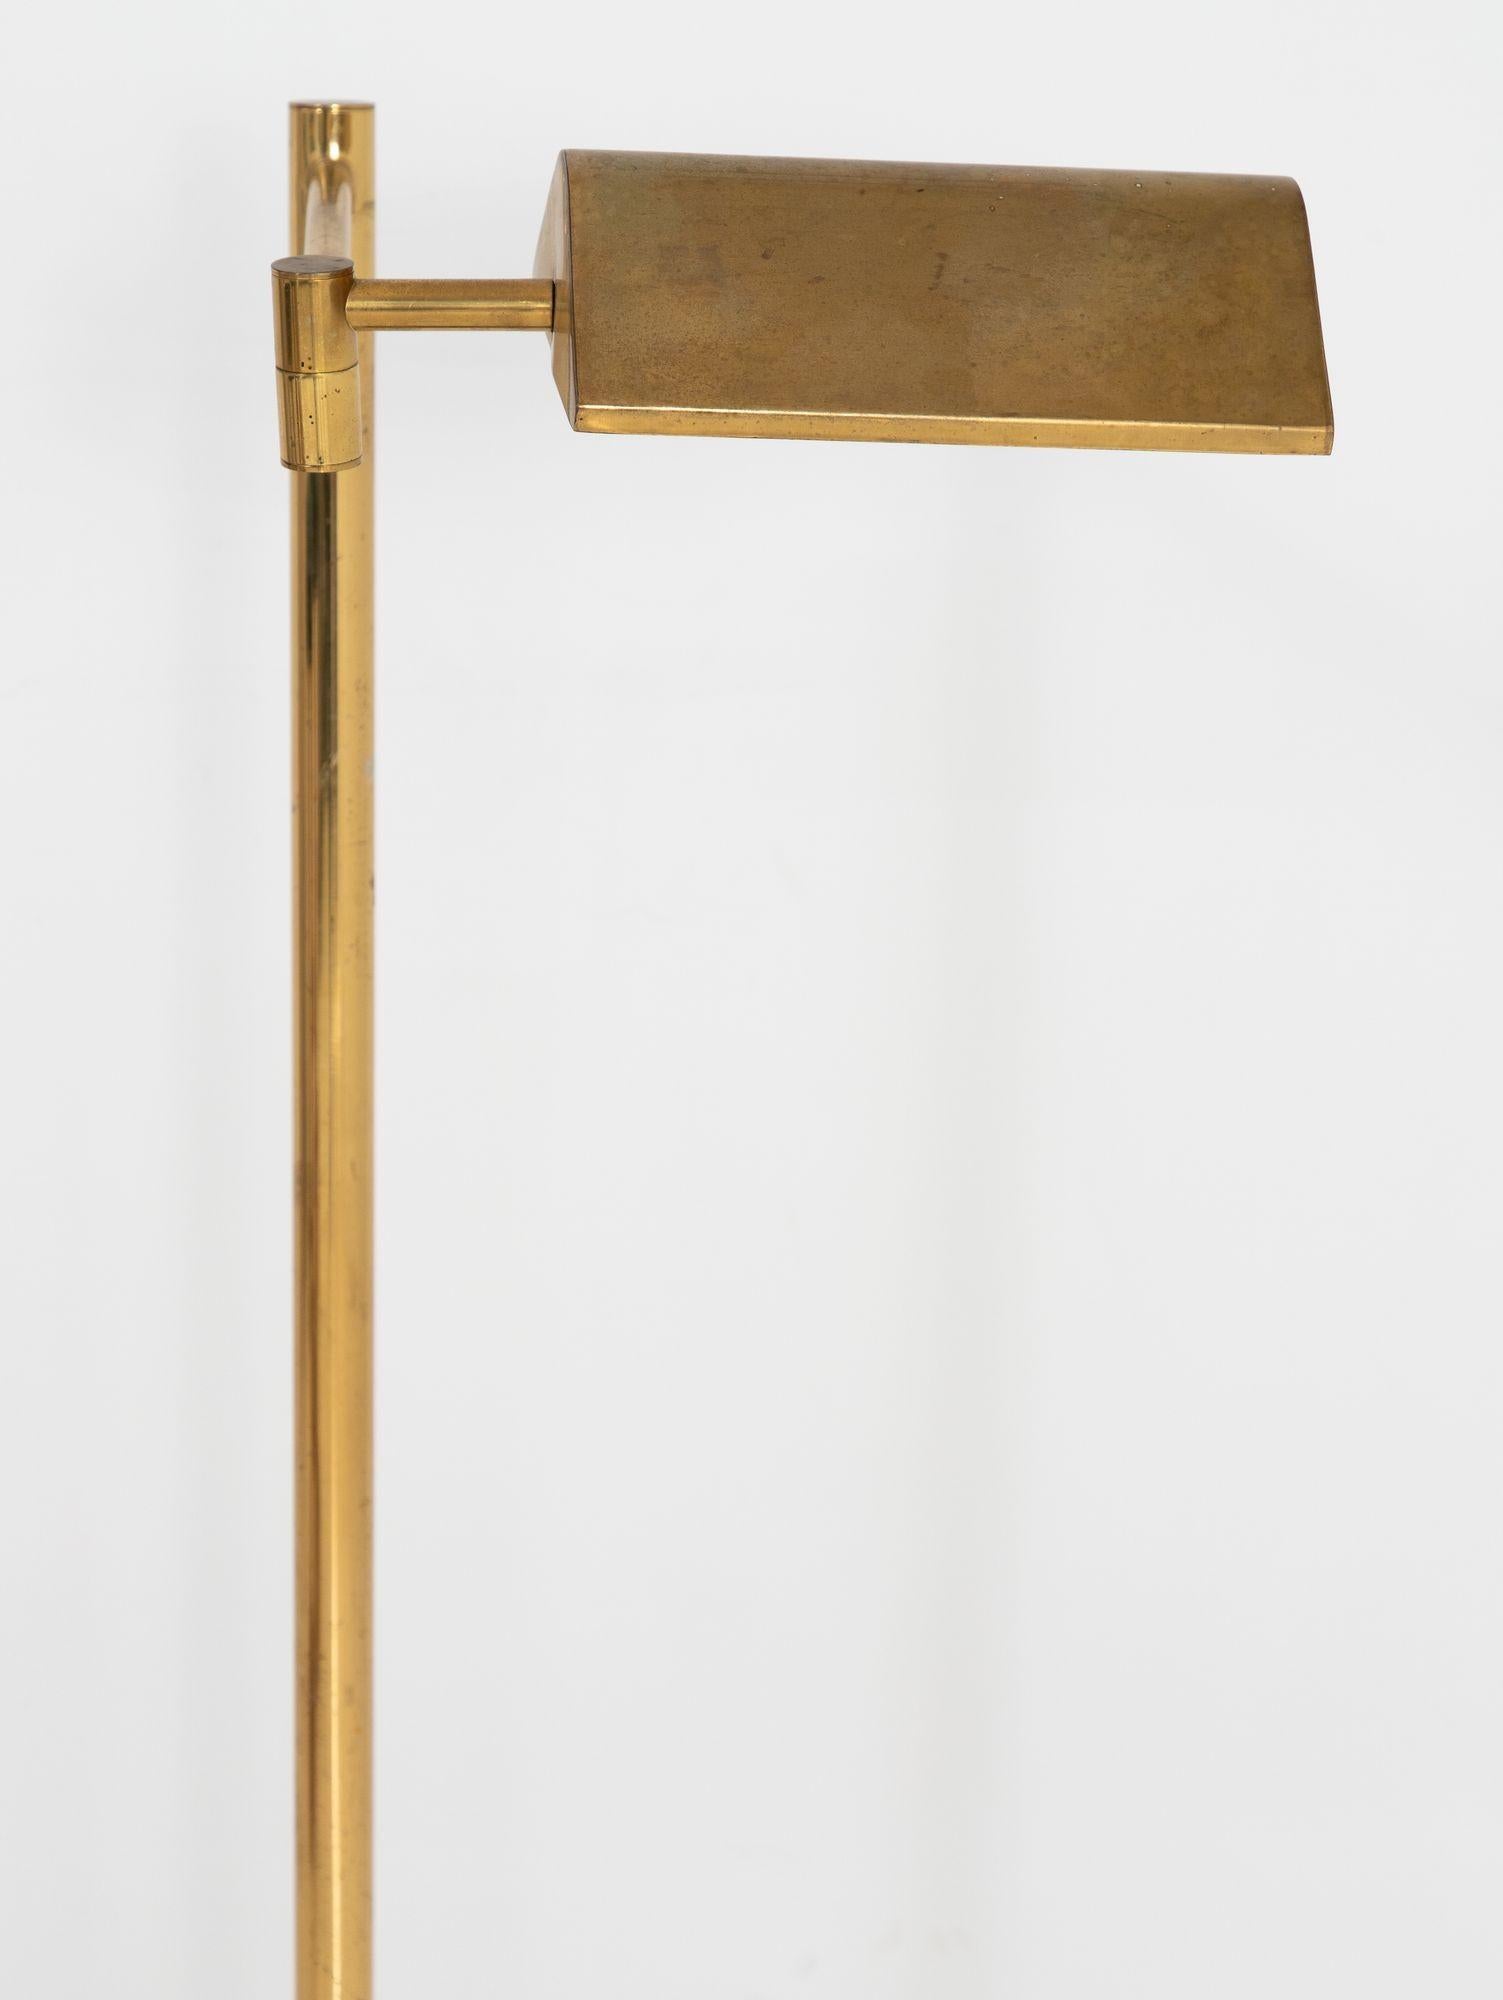 Vintage Brass Floor Lamp, France mid 20th Century For Sale 3